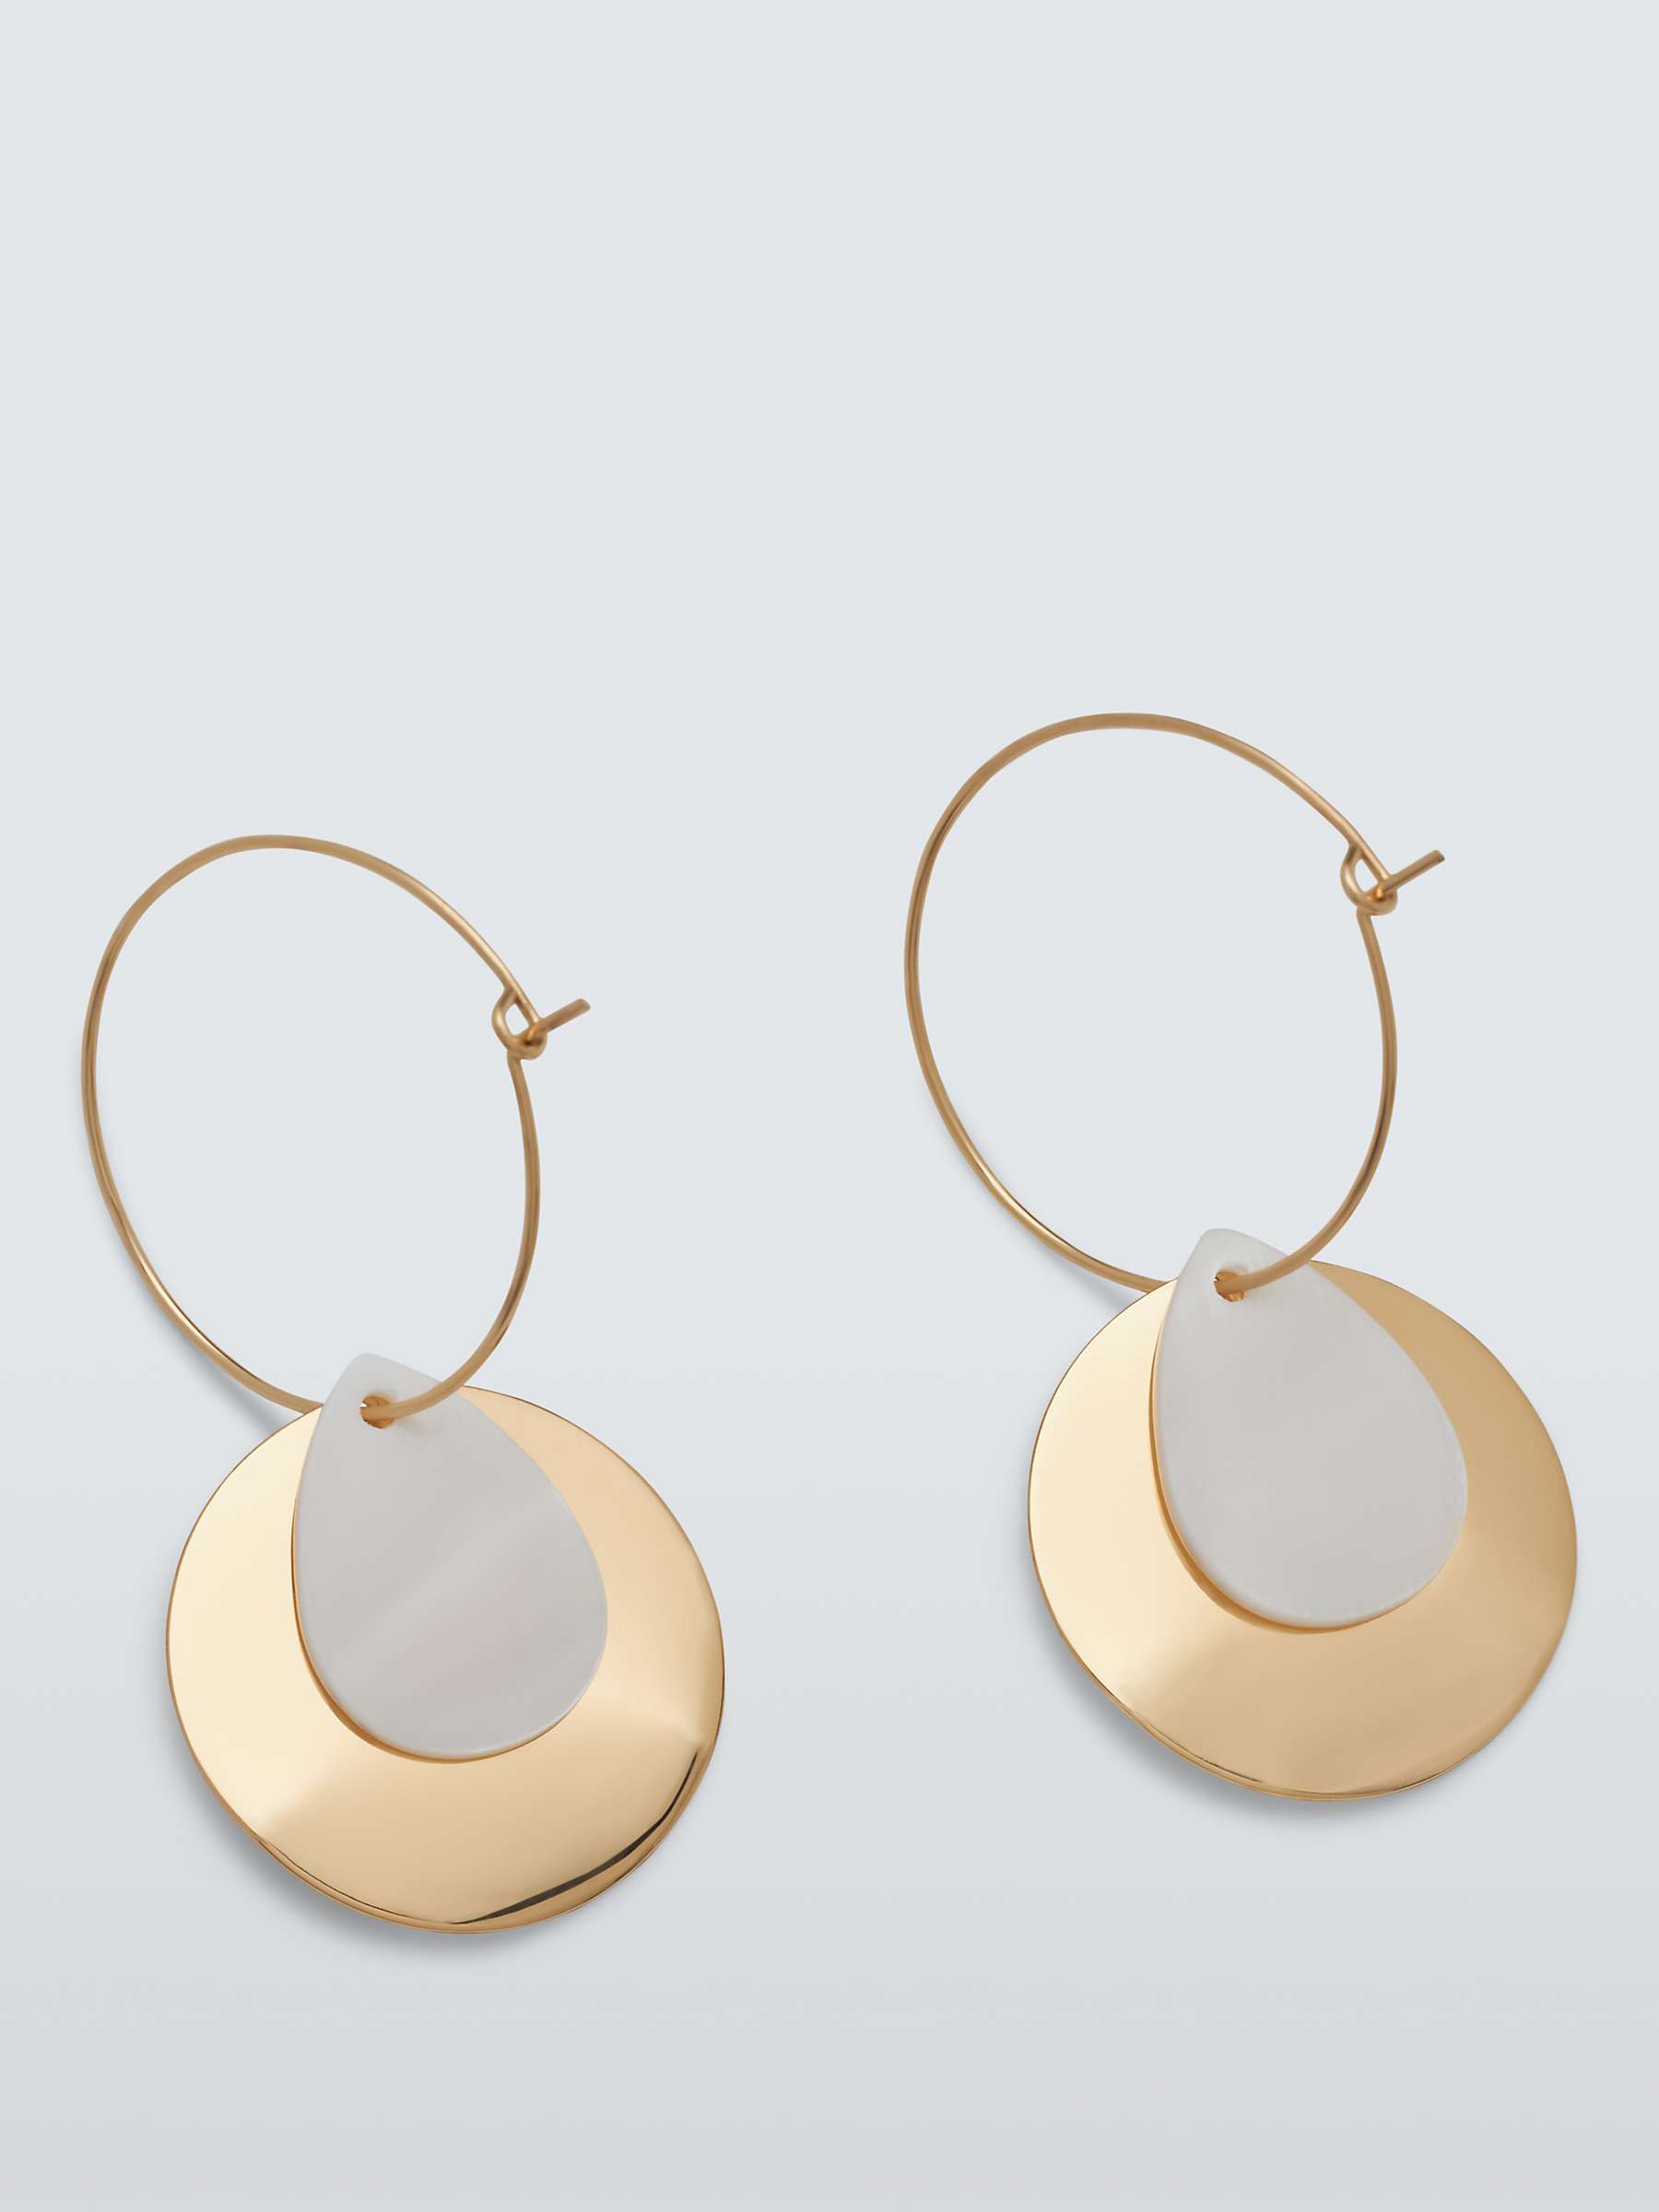 Buy John Lewis Polished Disc and Shell Drop Hoop Earrings, Gold Online at johnlewis.com